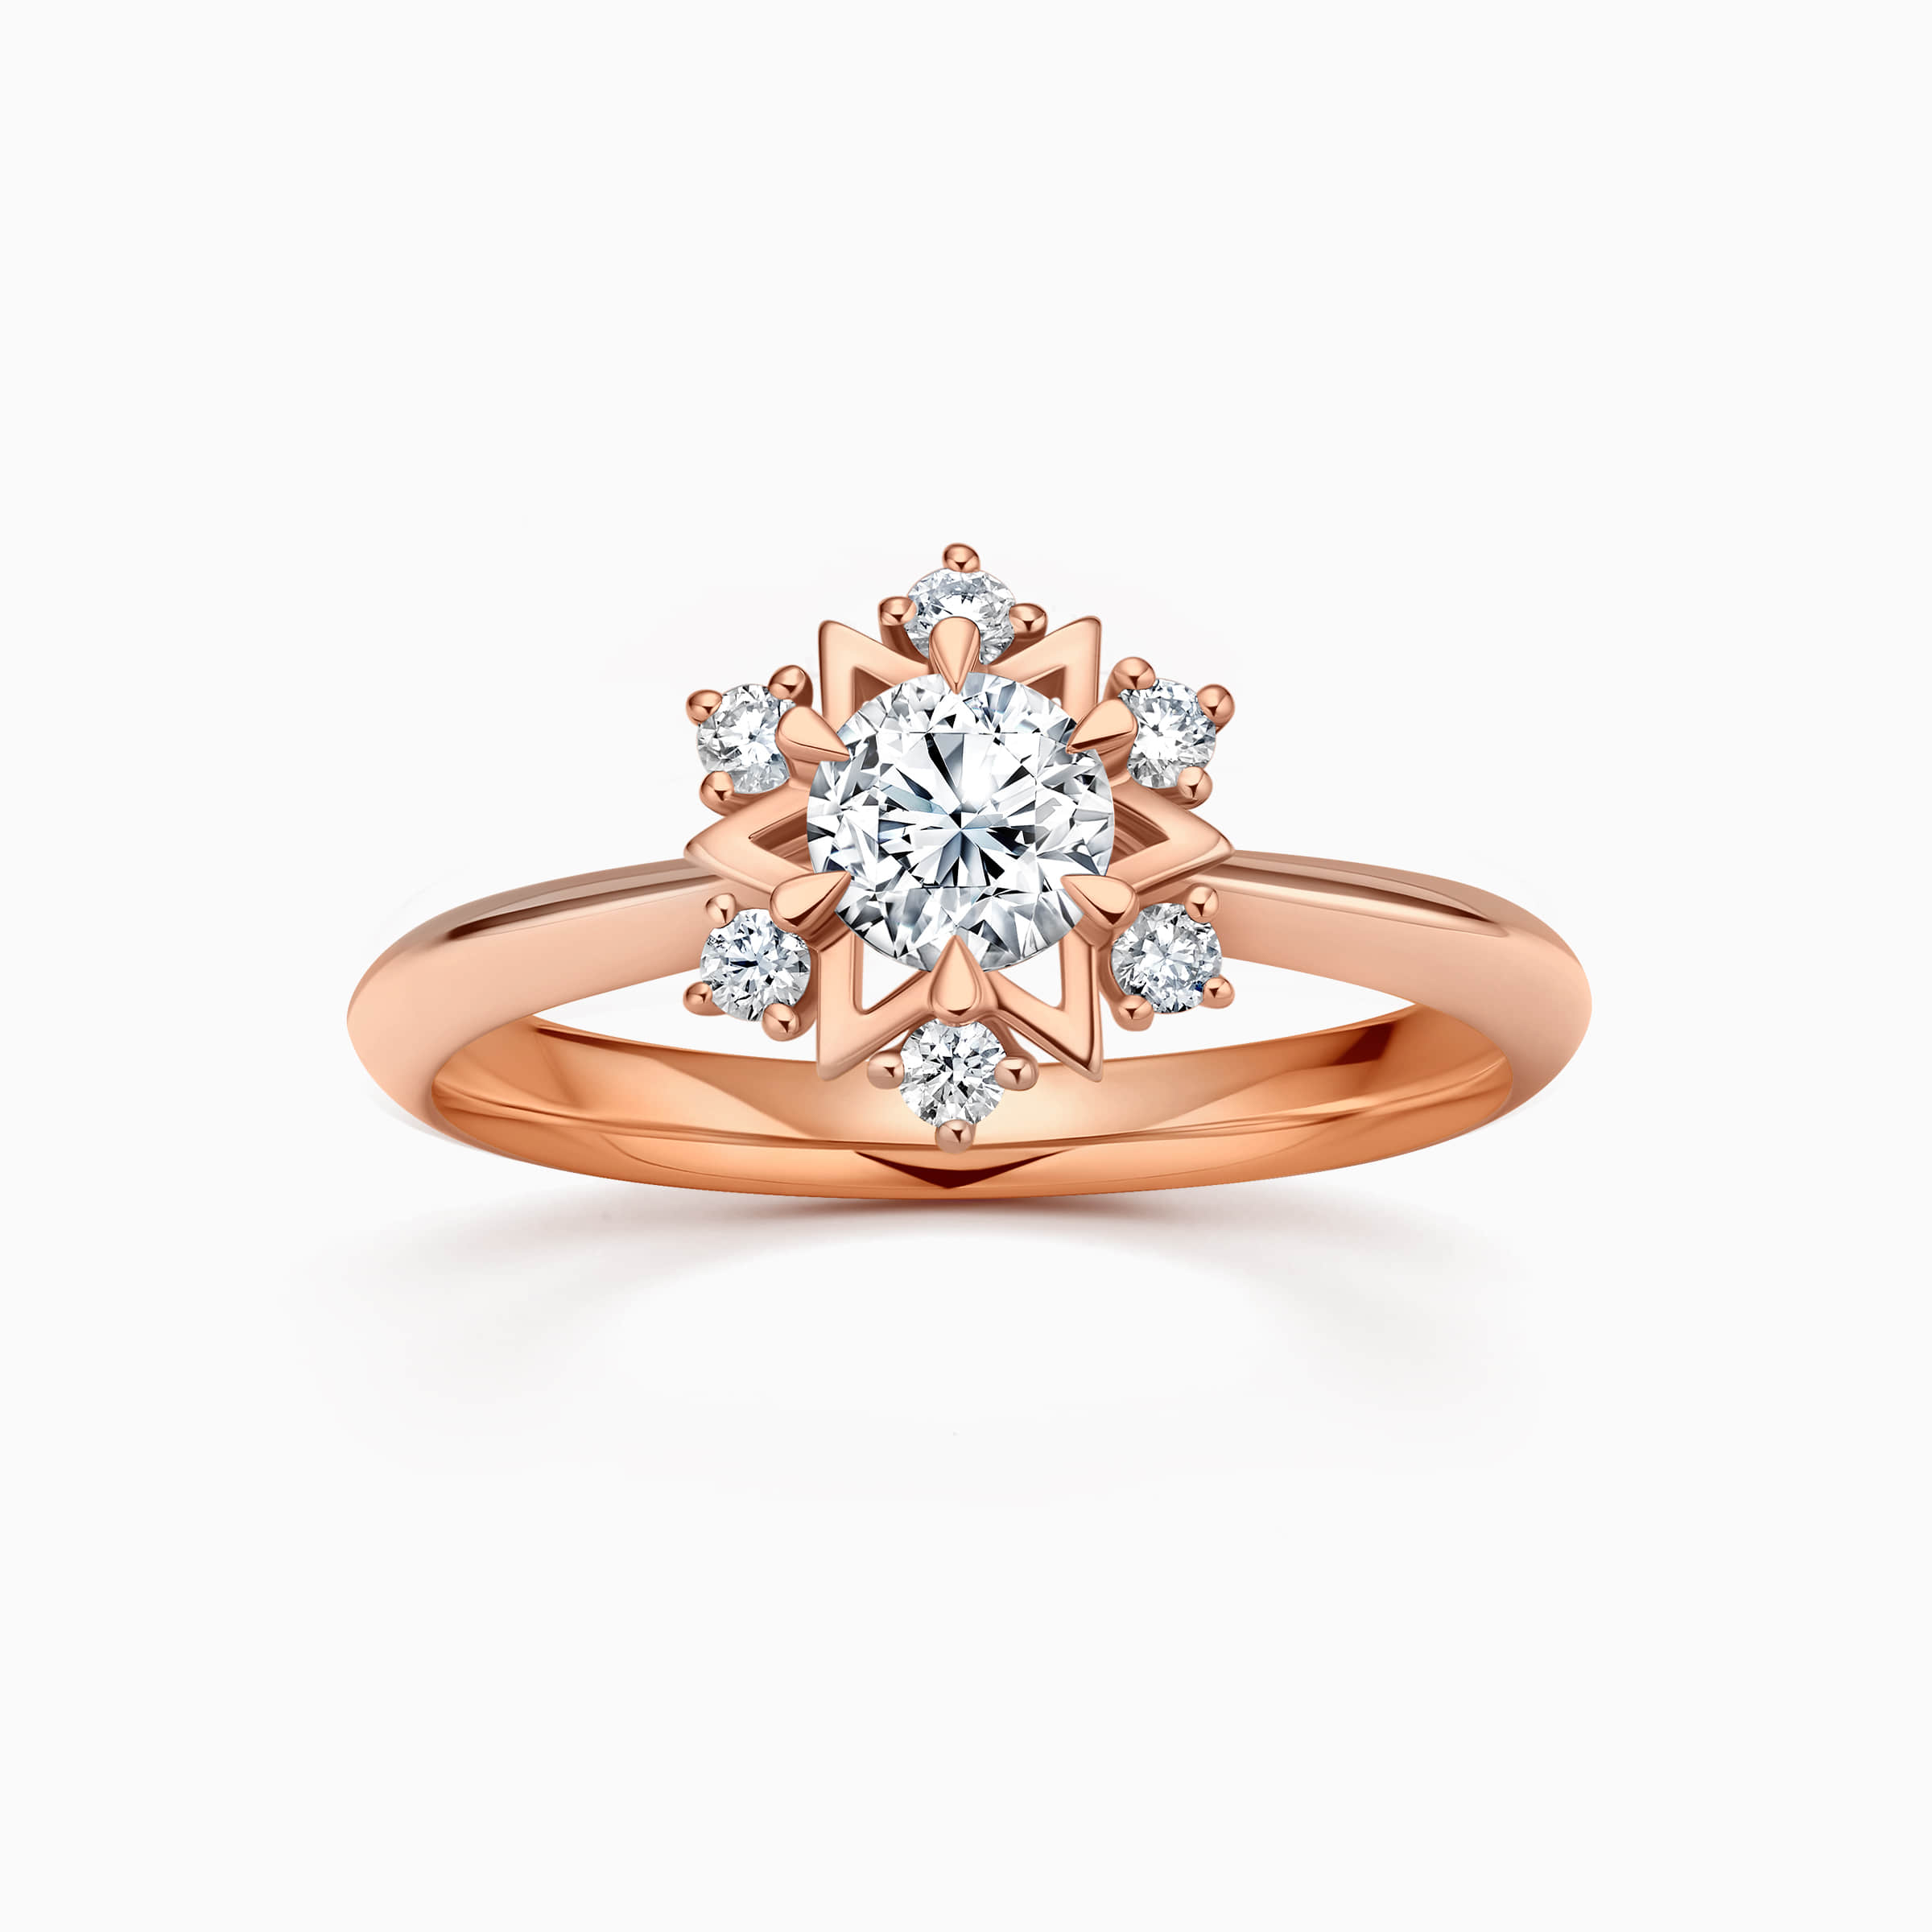 Darry Ring star engagement ring rose gold